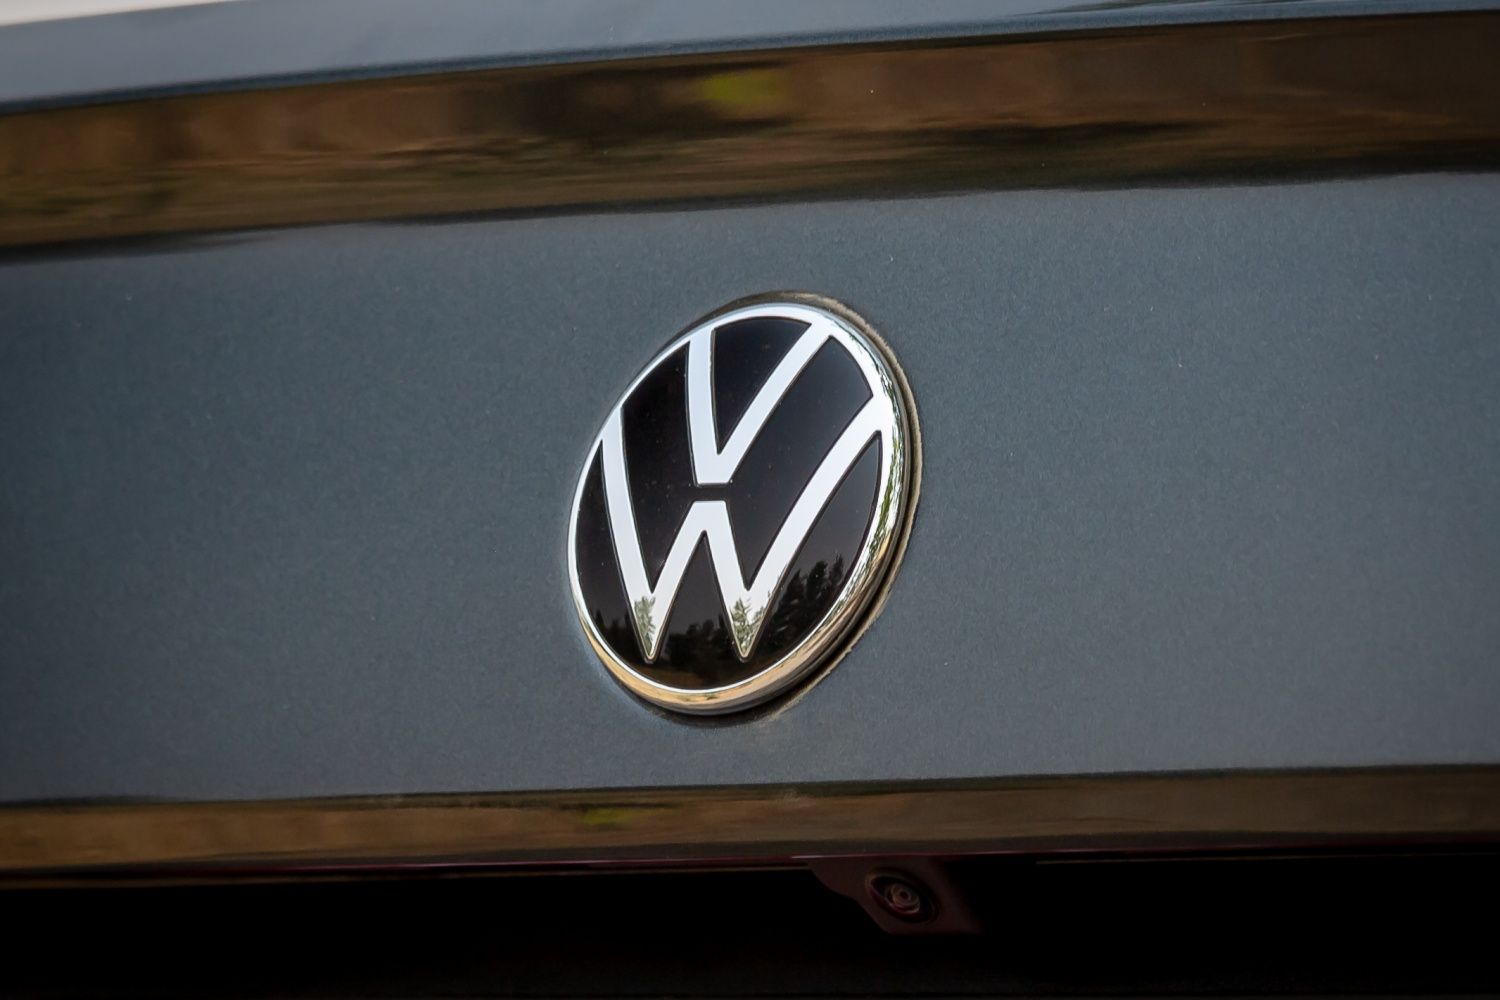 Volkswagen to not offer a sub-4m SUV in India